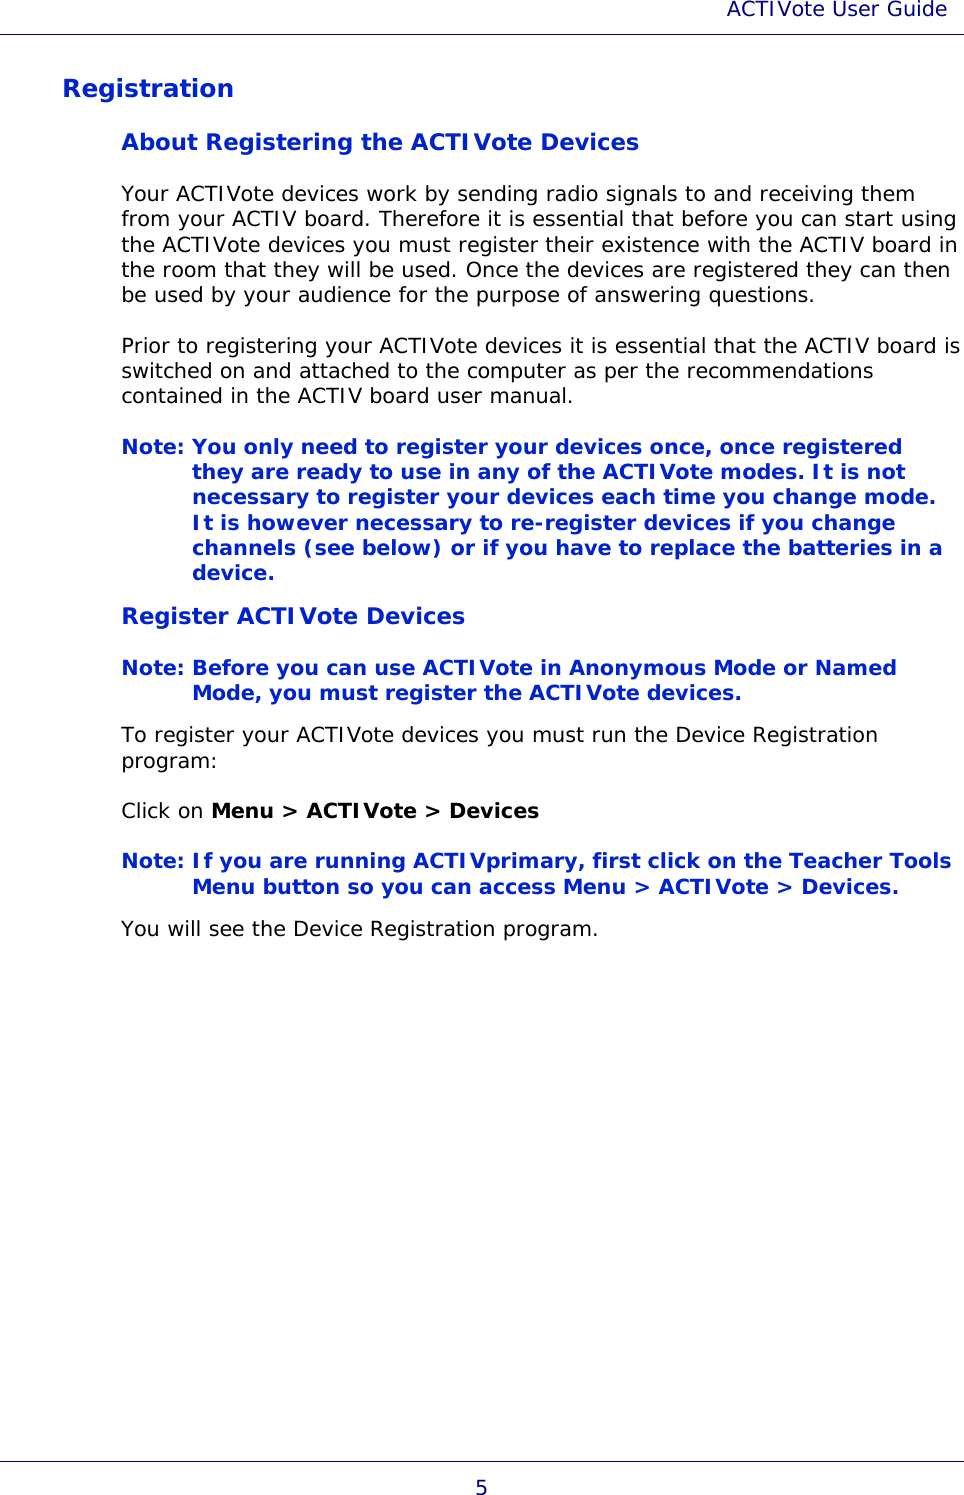 ACTIVote User Guide 5 Registration About Registering the ACTIVote Devices Your ACTIVote devices work by sending radio signals to and receiving them from your ACTIV board. Therefore it is essential that before you can start using the ACTIVote devices you must register their existence with the ACTIV board in the room that they will be used. Once the devices are registered they can then be used by your audience for the purpose of answering questions. Prior to registering your ACTIVote devices it is essential that the ACTIV board is switched on and attached to the computer as per the recommendations contained in the ACTIV board user manual. Note: You only need to register your devices once, once registered they are ready to use in any of the ACTIVote modes. It is not necessary to register your devices each time you change mode. It is however necessary to re-register devices if you change channels (see below) or if you have to replace the batteries in a device. Register ACTIVote Devices Note: Before you can use ACTIVote in Anonymous Mode or Named Mode, you must register the ACTIVote devices. To register your ACTIVote devices you must run the Device Registration program: Click on Menu &gt; ACTIVote &gt; Devices Note: If you are running ACTIVprimary, first click on the Teacher Tools Menu button so you can access Menu &gt; ACTIVote &gt; Devices. You will see the Device Registration program. 